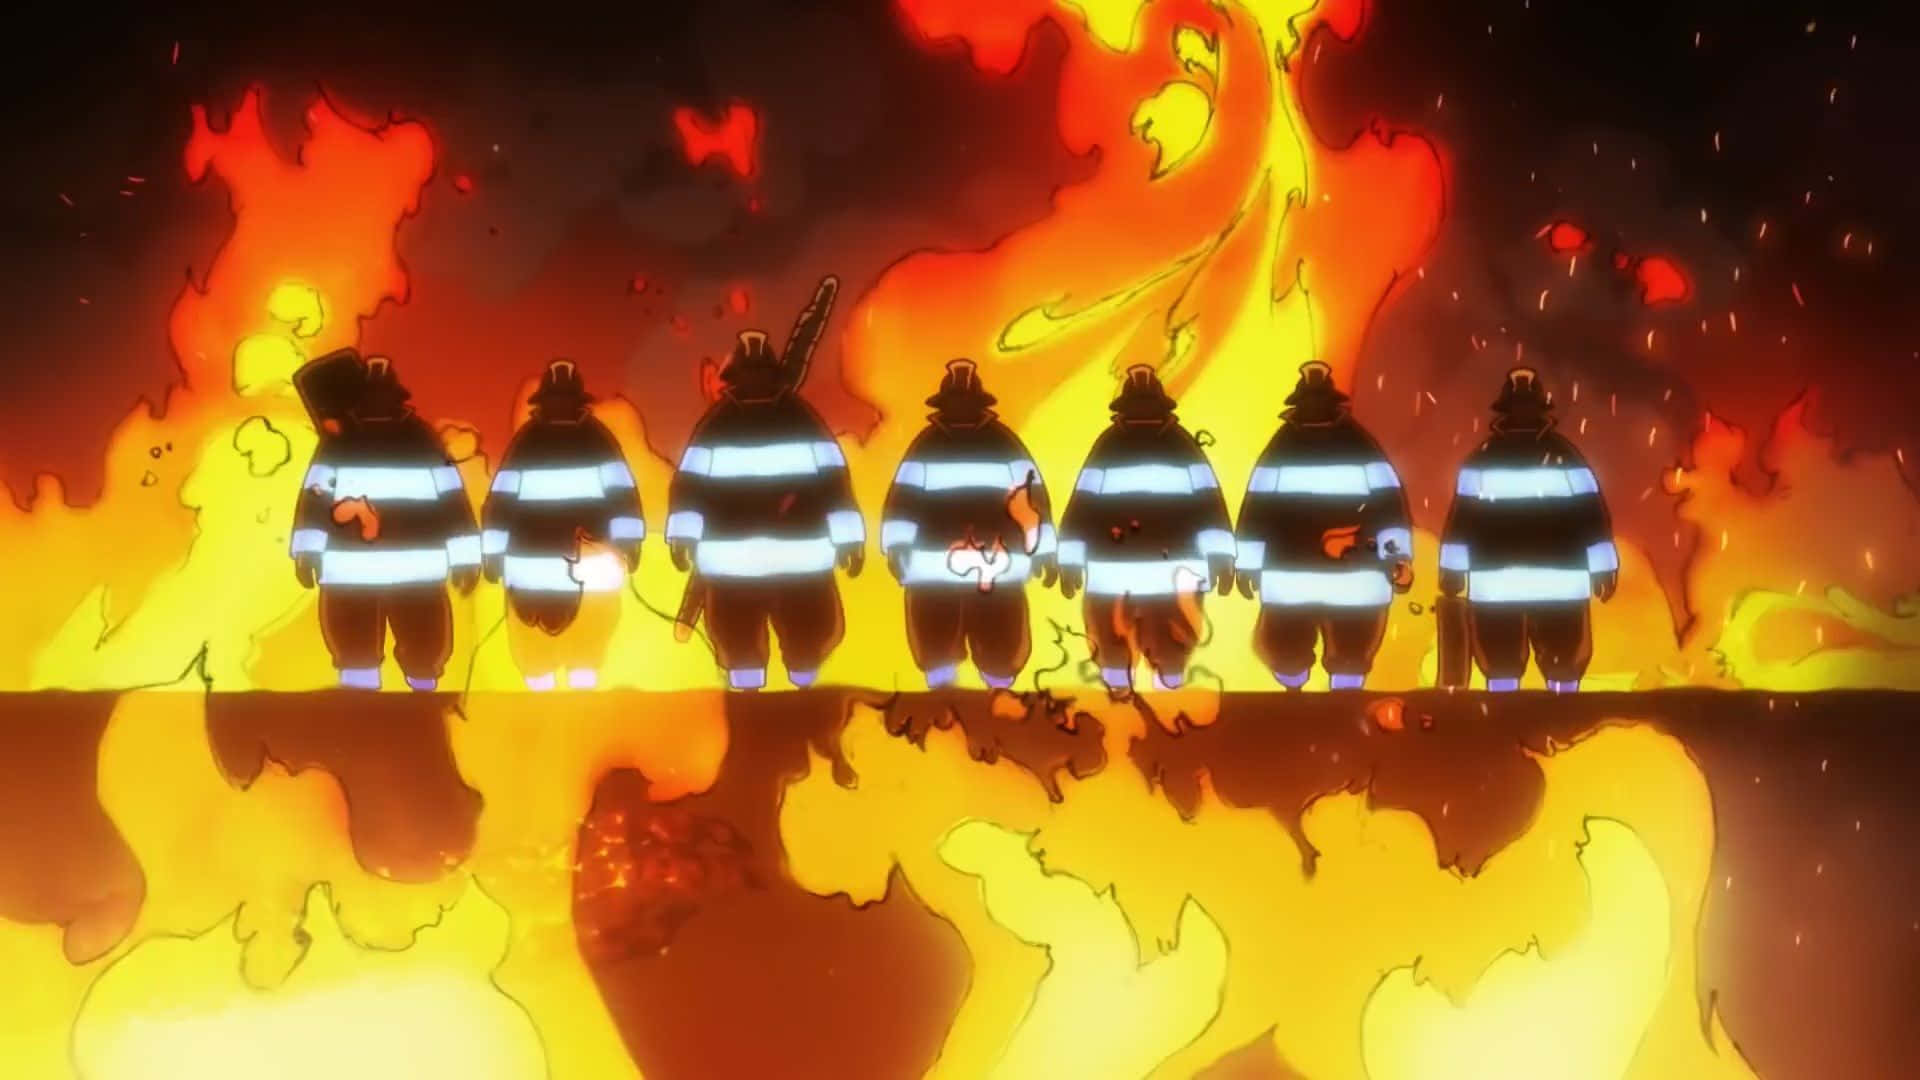 A Group Of Firemen Standing In Front Of A Fire Wallpaper